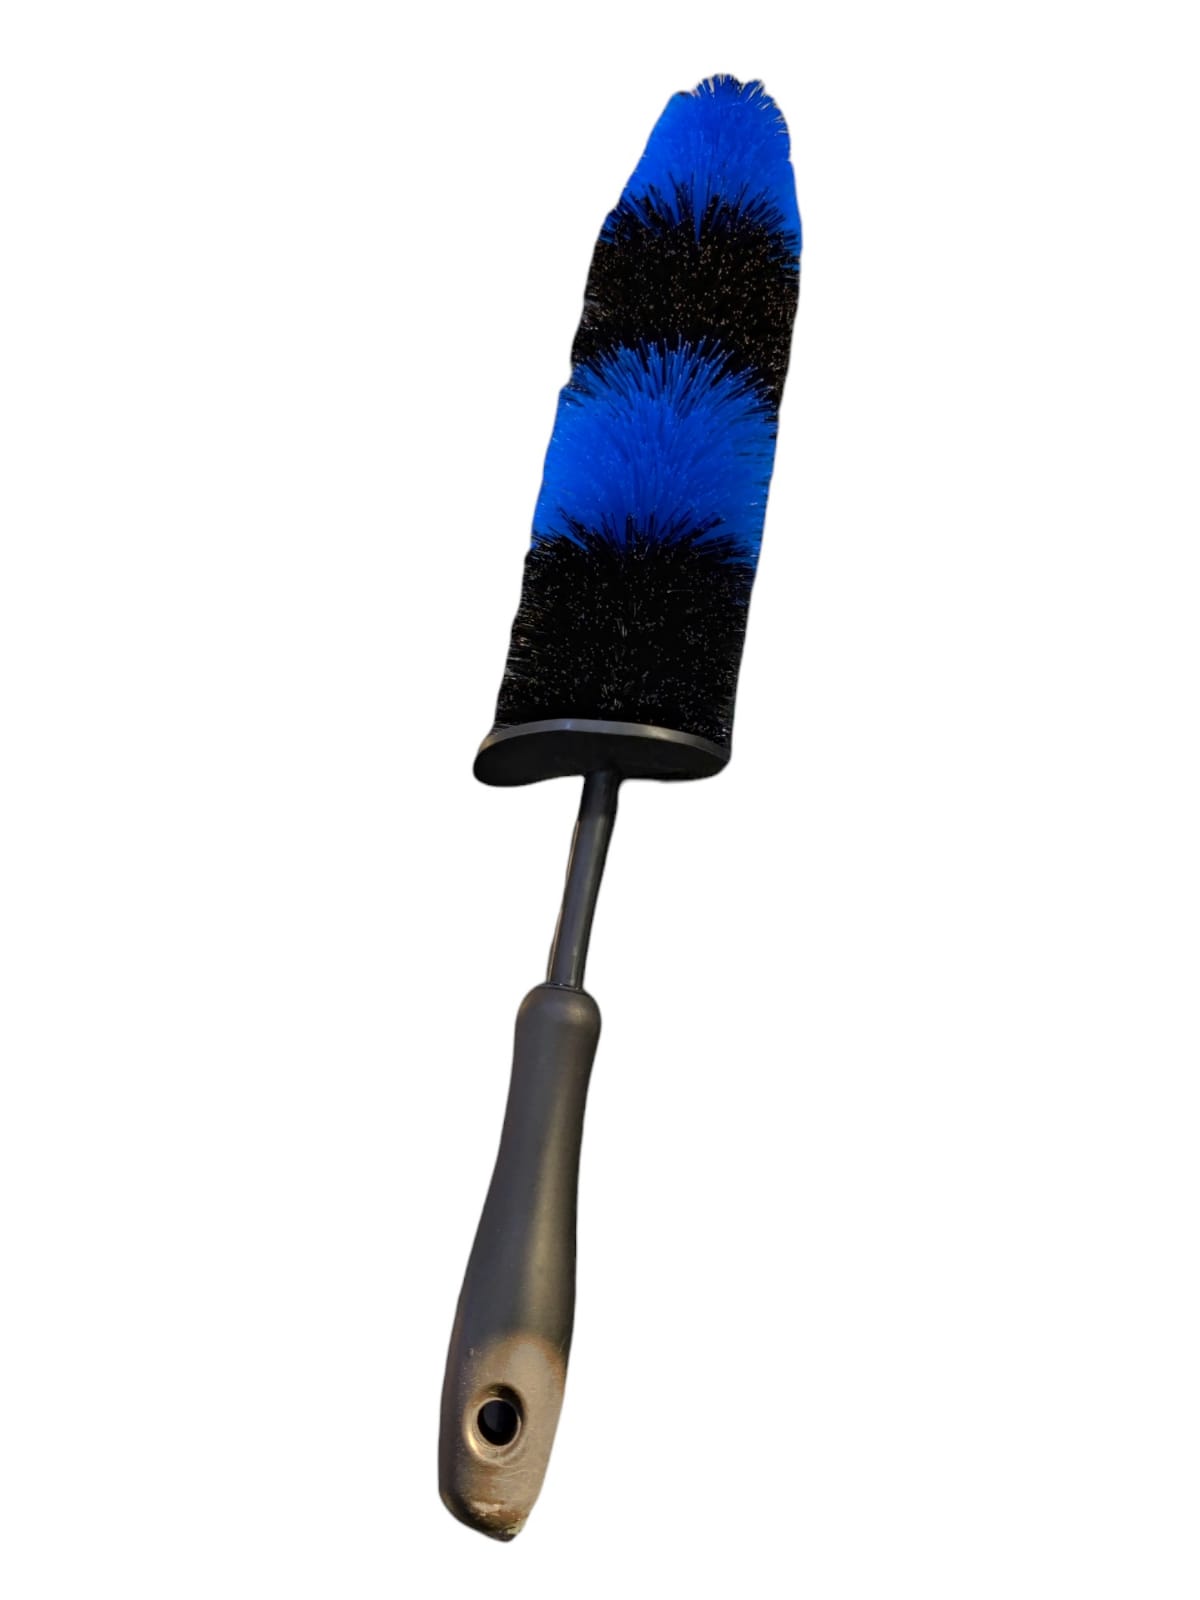 Alloy & Wheel Cleaning Brush